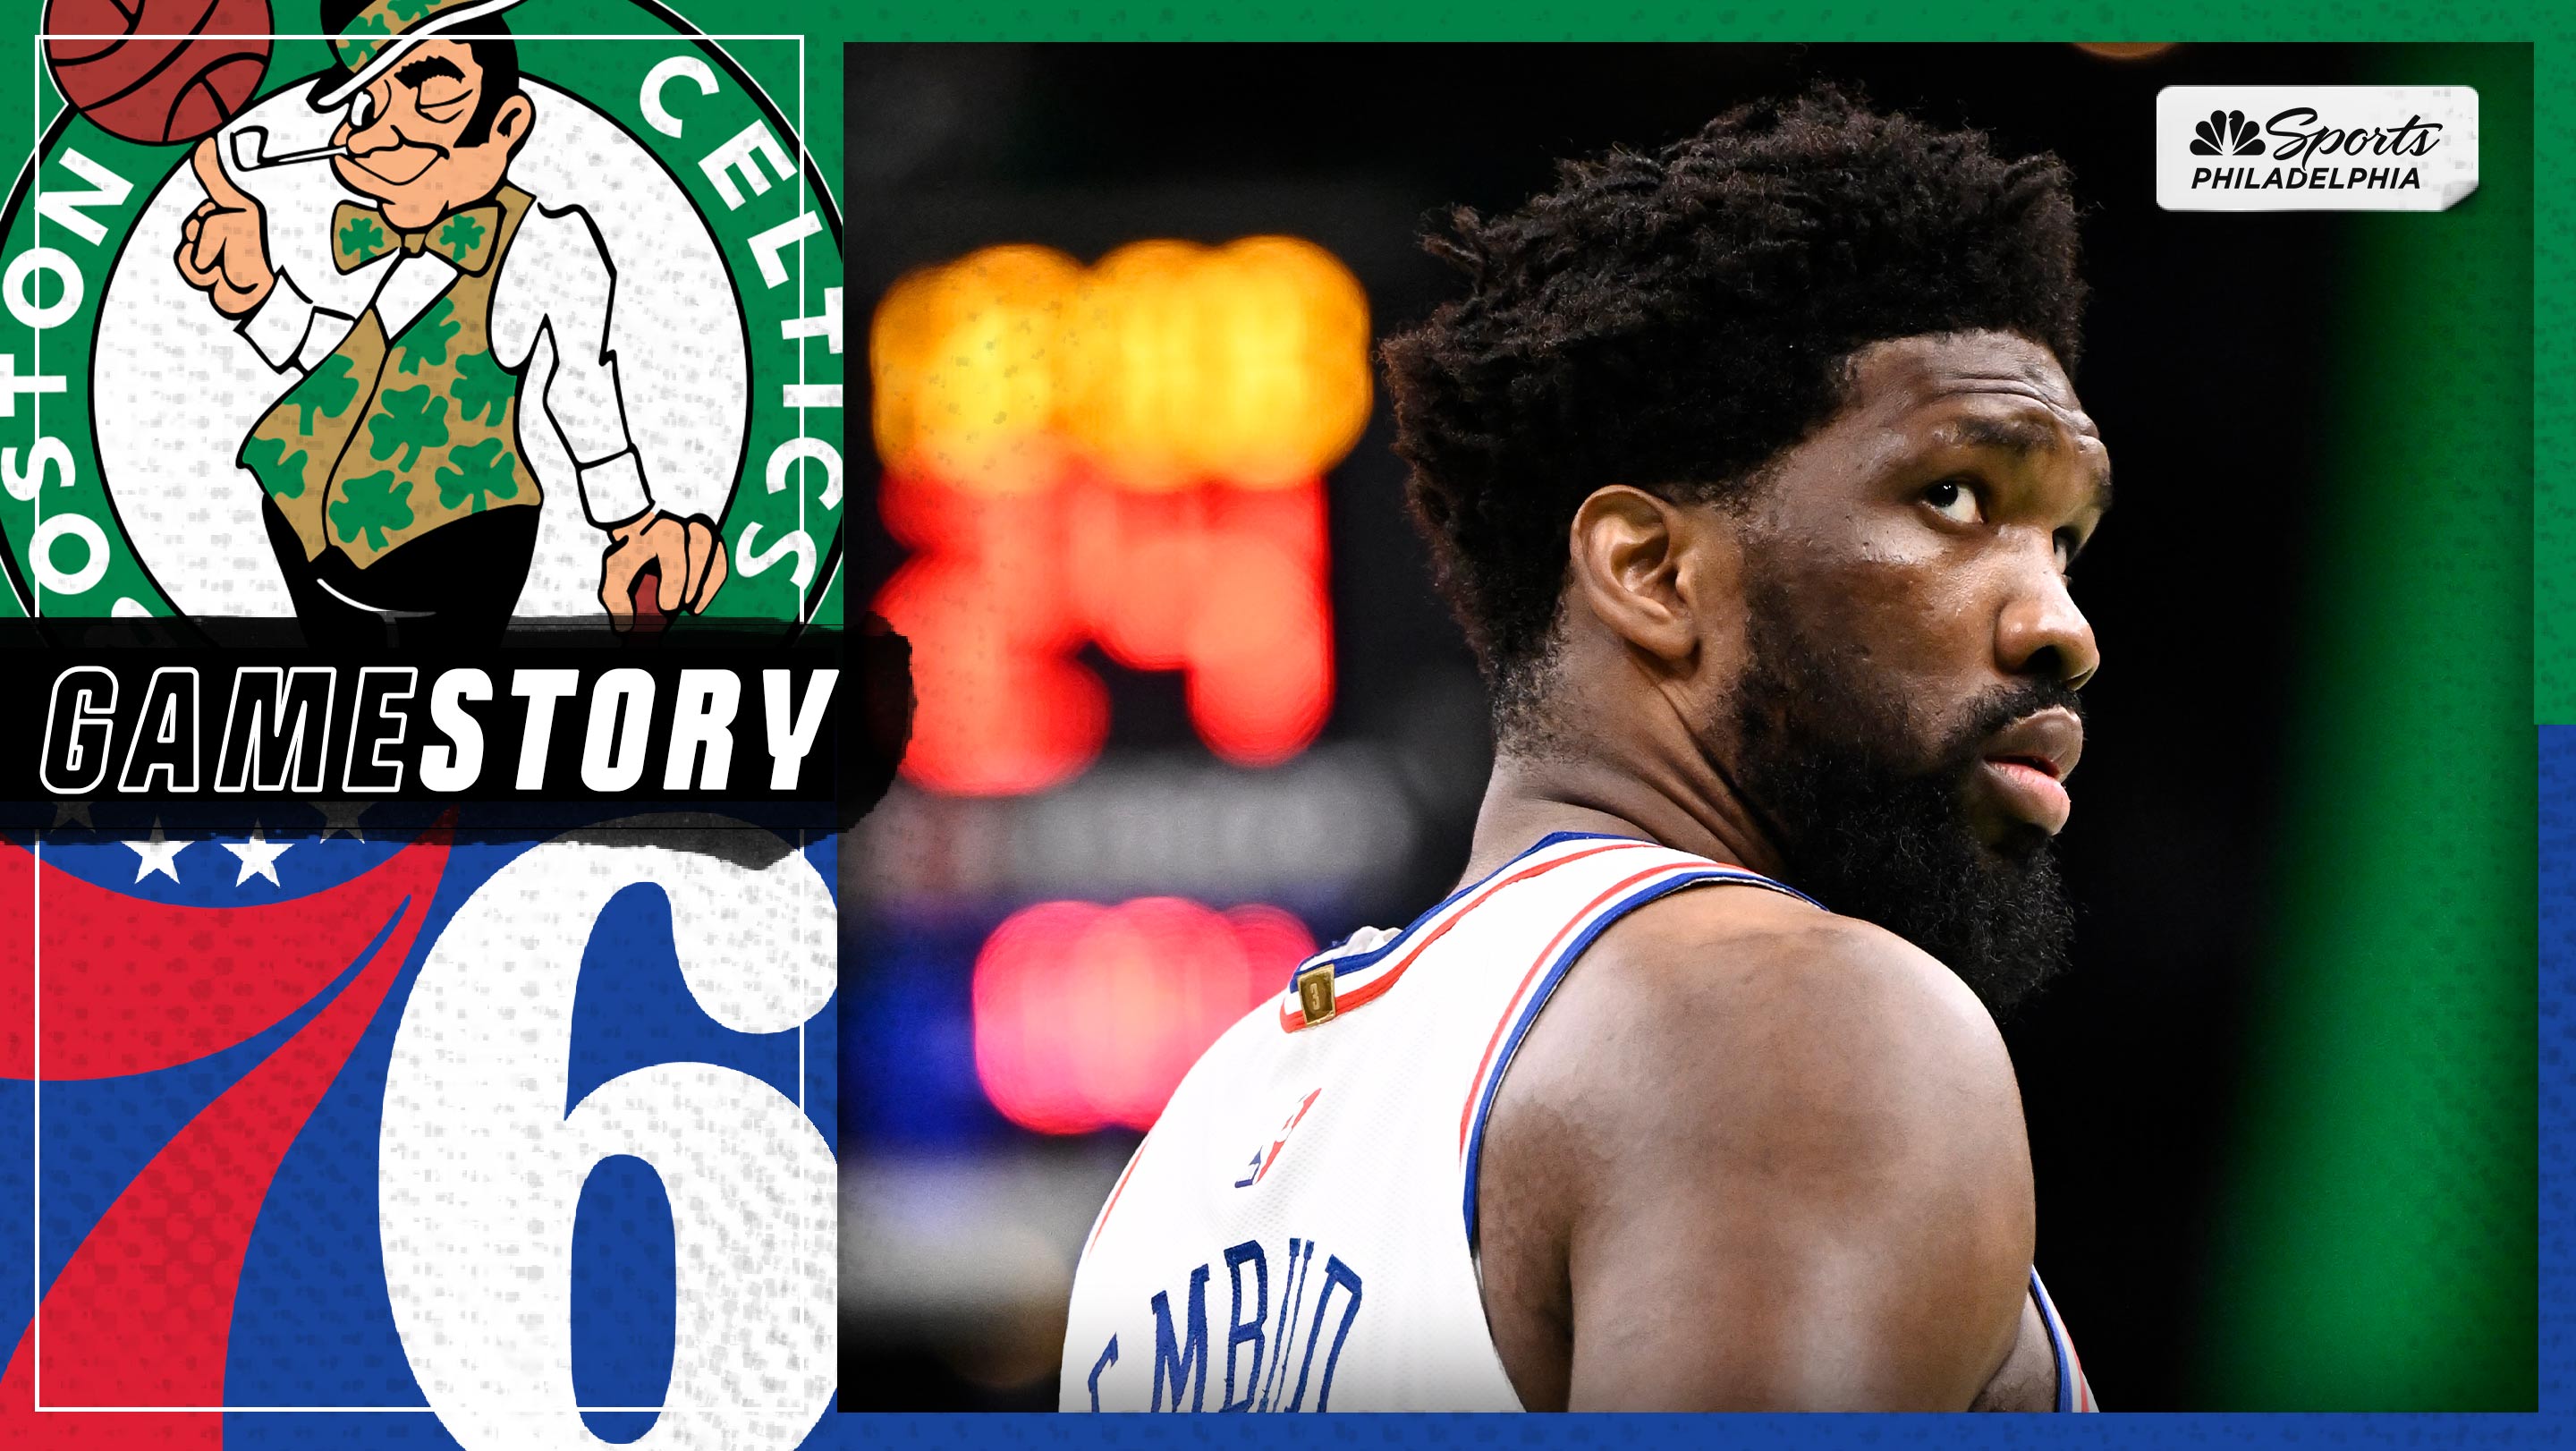 NBA playoffs: Celtics spoil Embiid's return with Game 2 blowout of Sixers, NBA